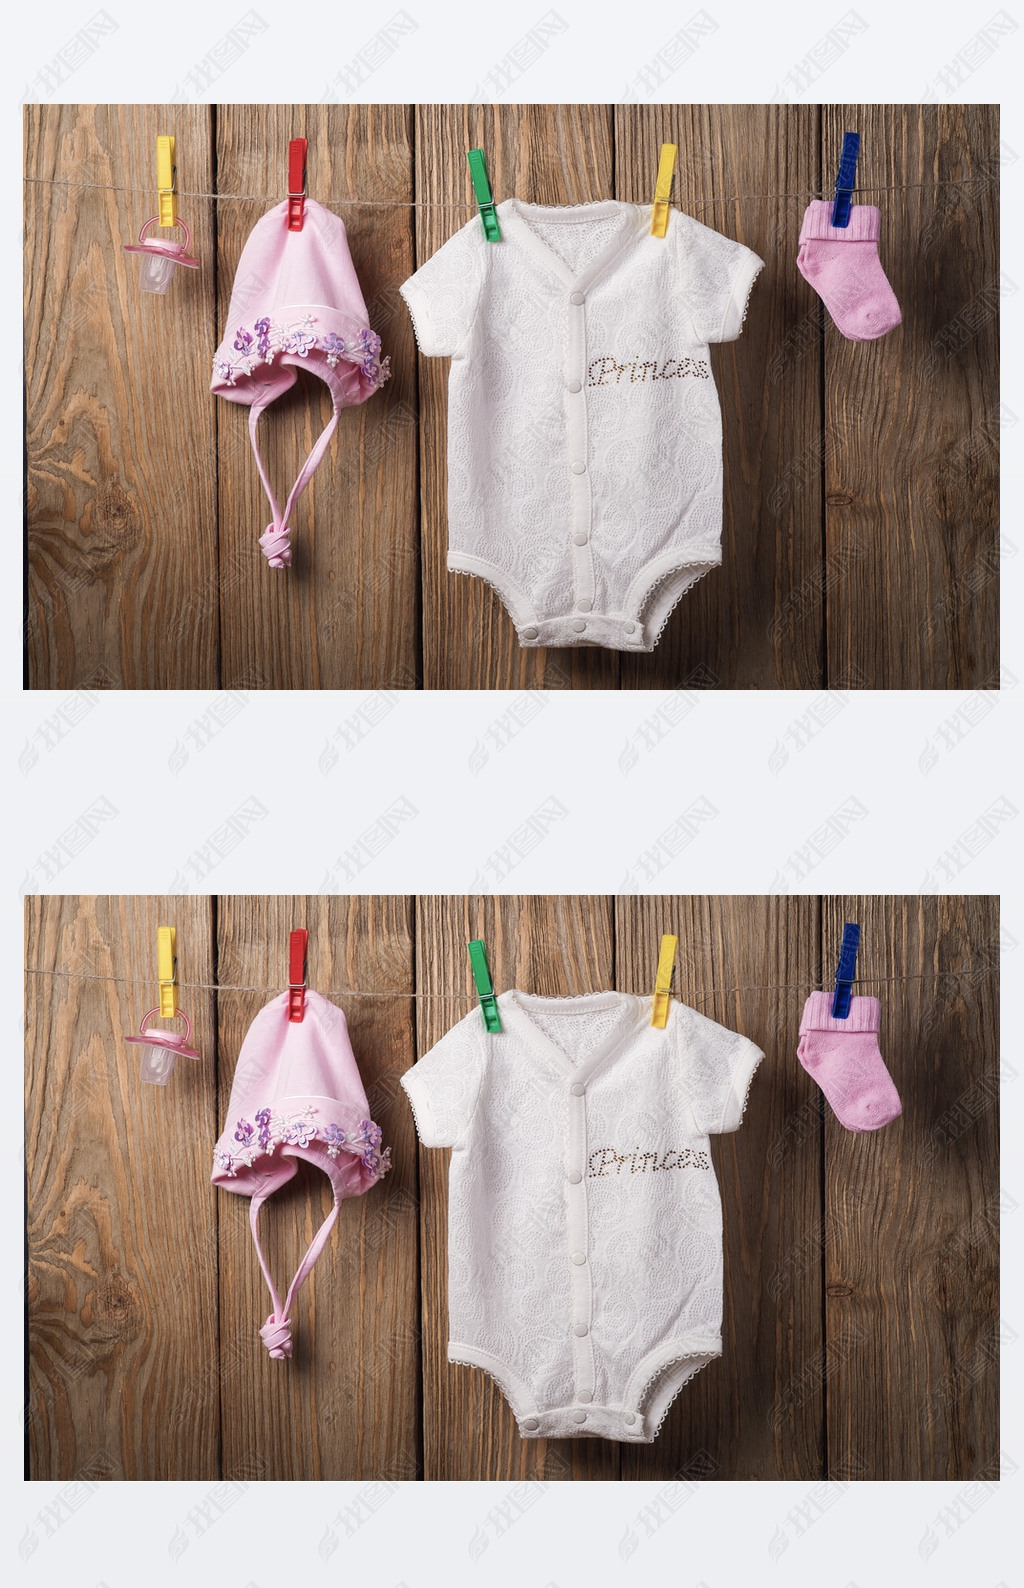 Baby clothing hanging on the clothesline on a wood background